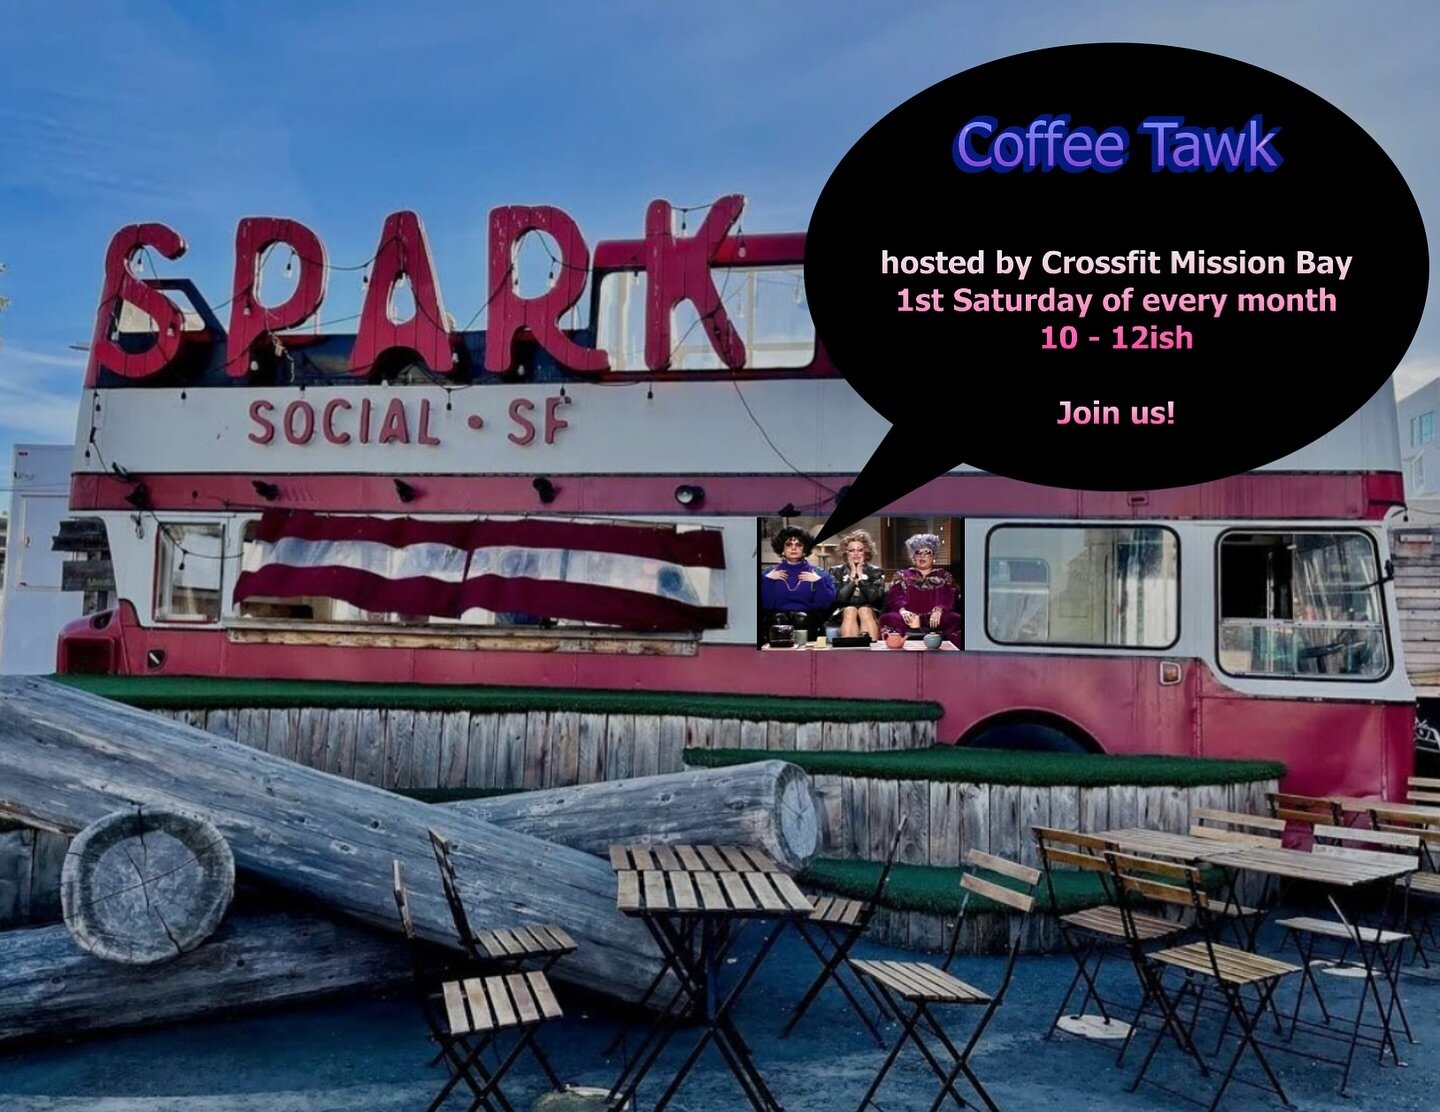 Reminder: Coffee Tawk social hangout near CFMB starts now! Come meet up with our crew at Spark Social across the street from CFMB.